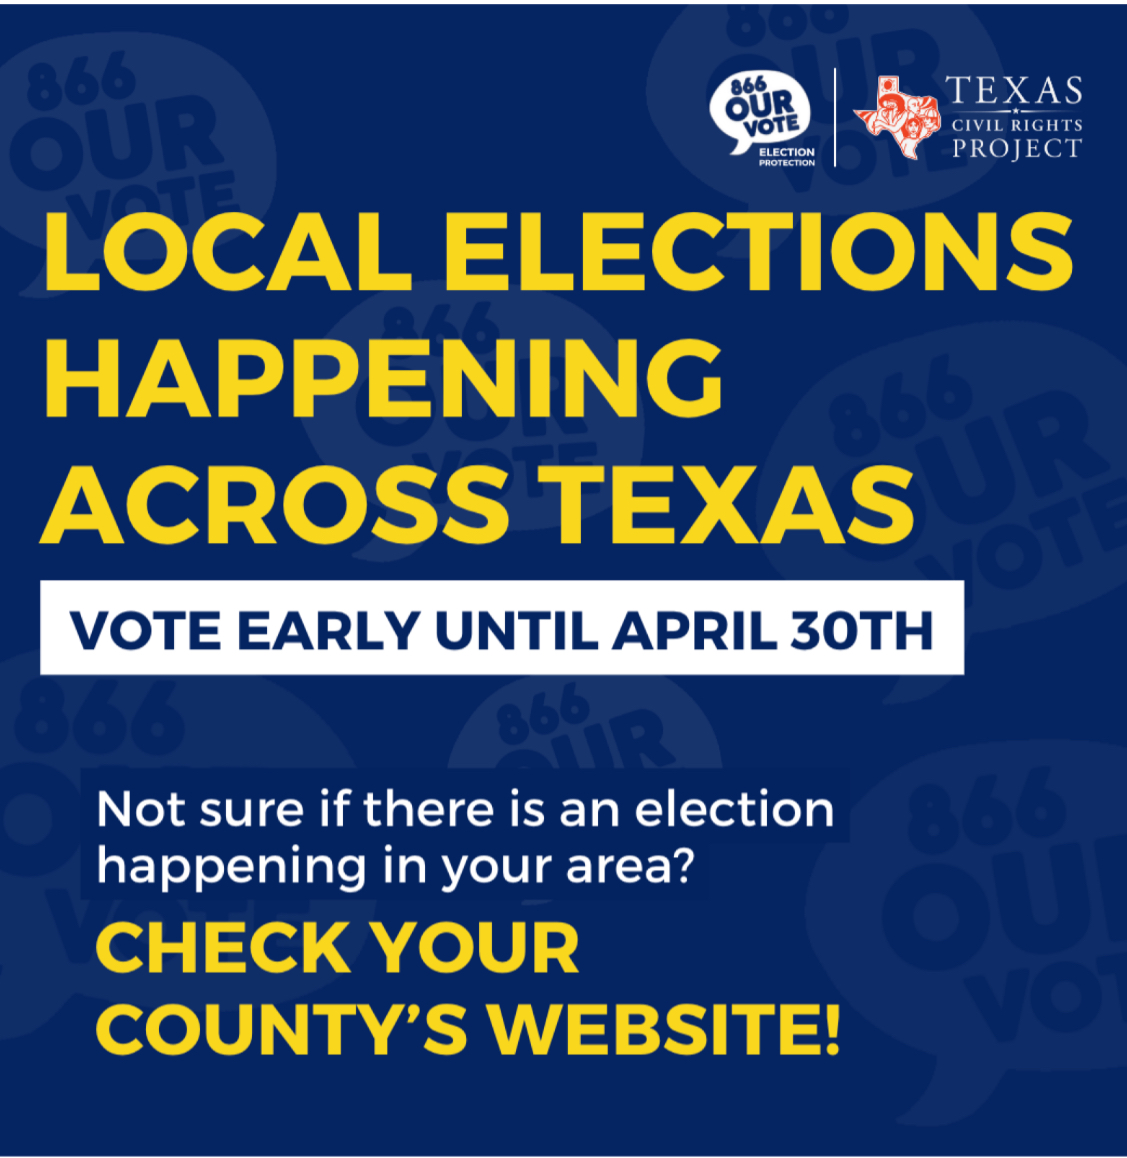 Early voting is happening across Texas for the May 4th Local Elections! Haven’t made your plan? Find your closest polling location now! Remember: This weekend will be your only opportunity to vote outside of weekdays! 866ourvote.org/state/texas/